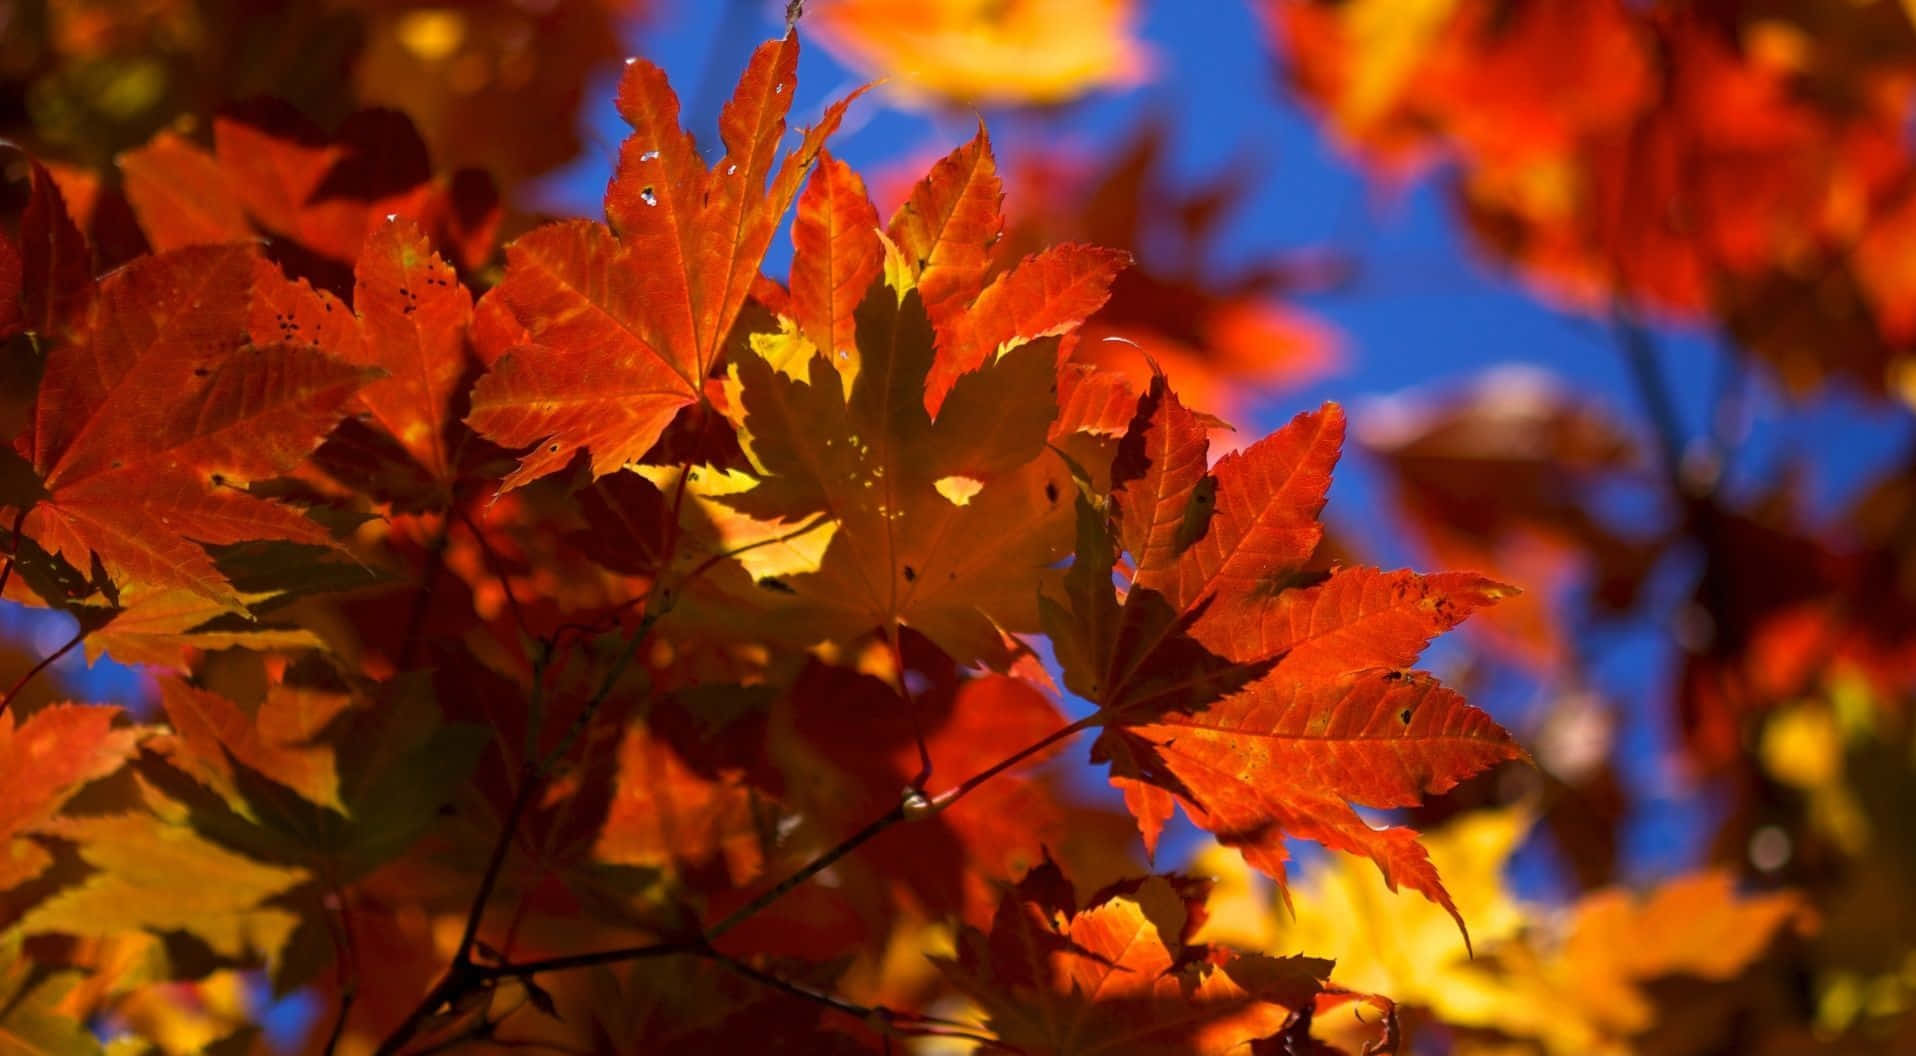 "Nature is an infinite beauty of brilliant fall leaves in hues of red, orange, and yellow"